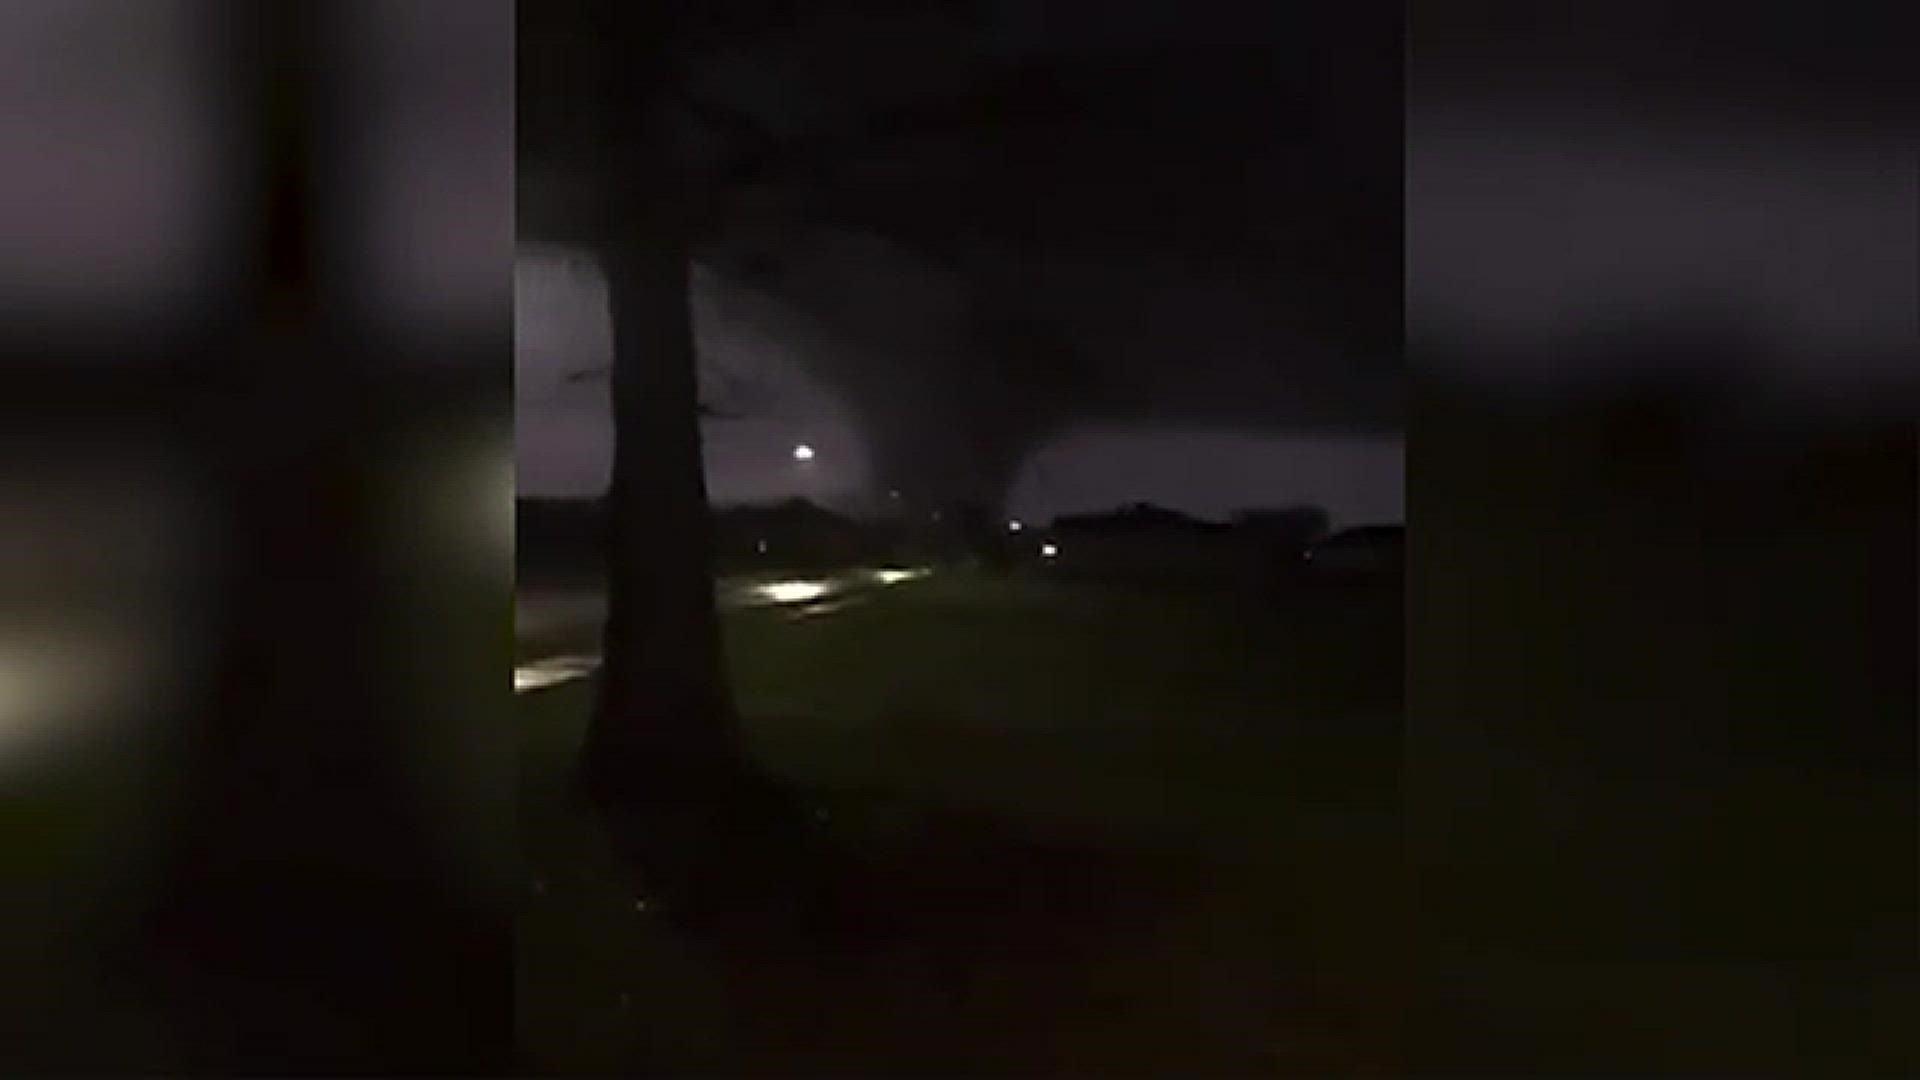 Our sister station in New Orleans, WWLTV, shared a video of a tornado in the Arabi area of St. Bernard Parish, Louisiana.